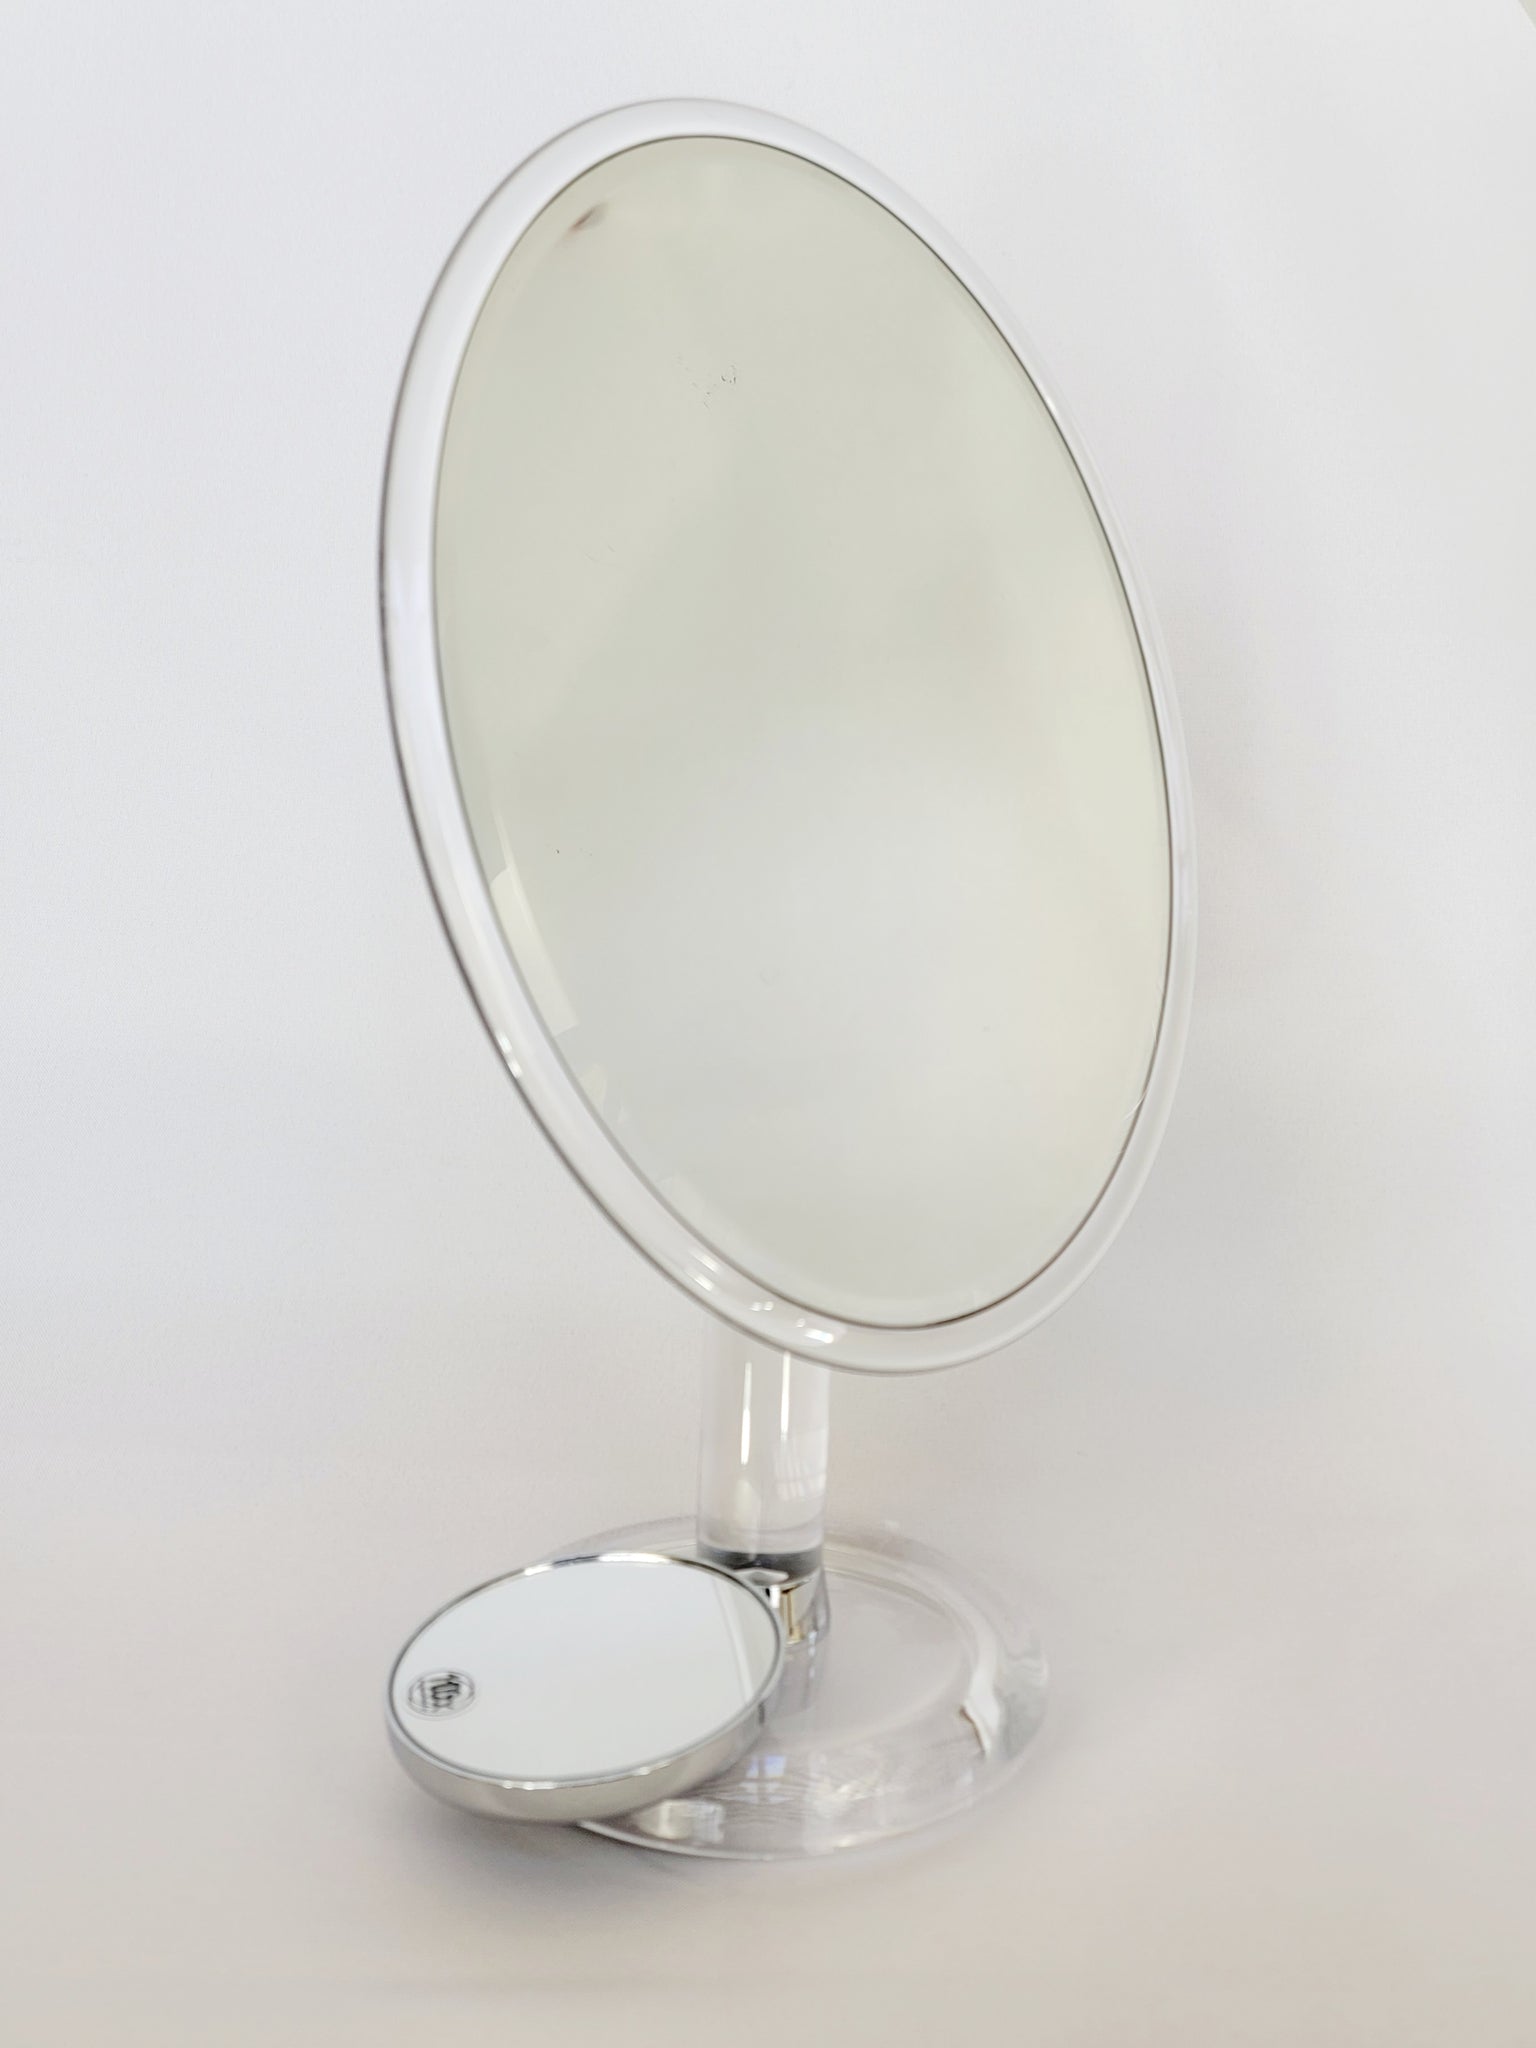 Oval Stand Mirror W/ 10X Magnification Magnetic Insert